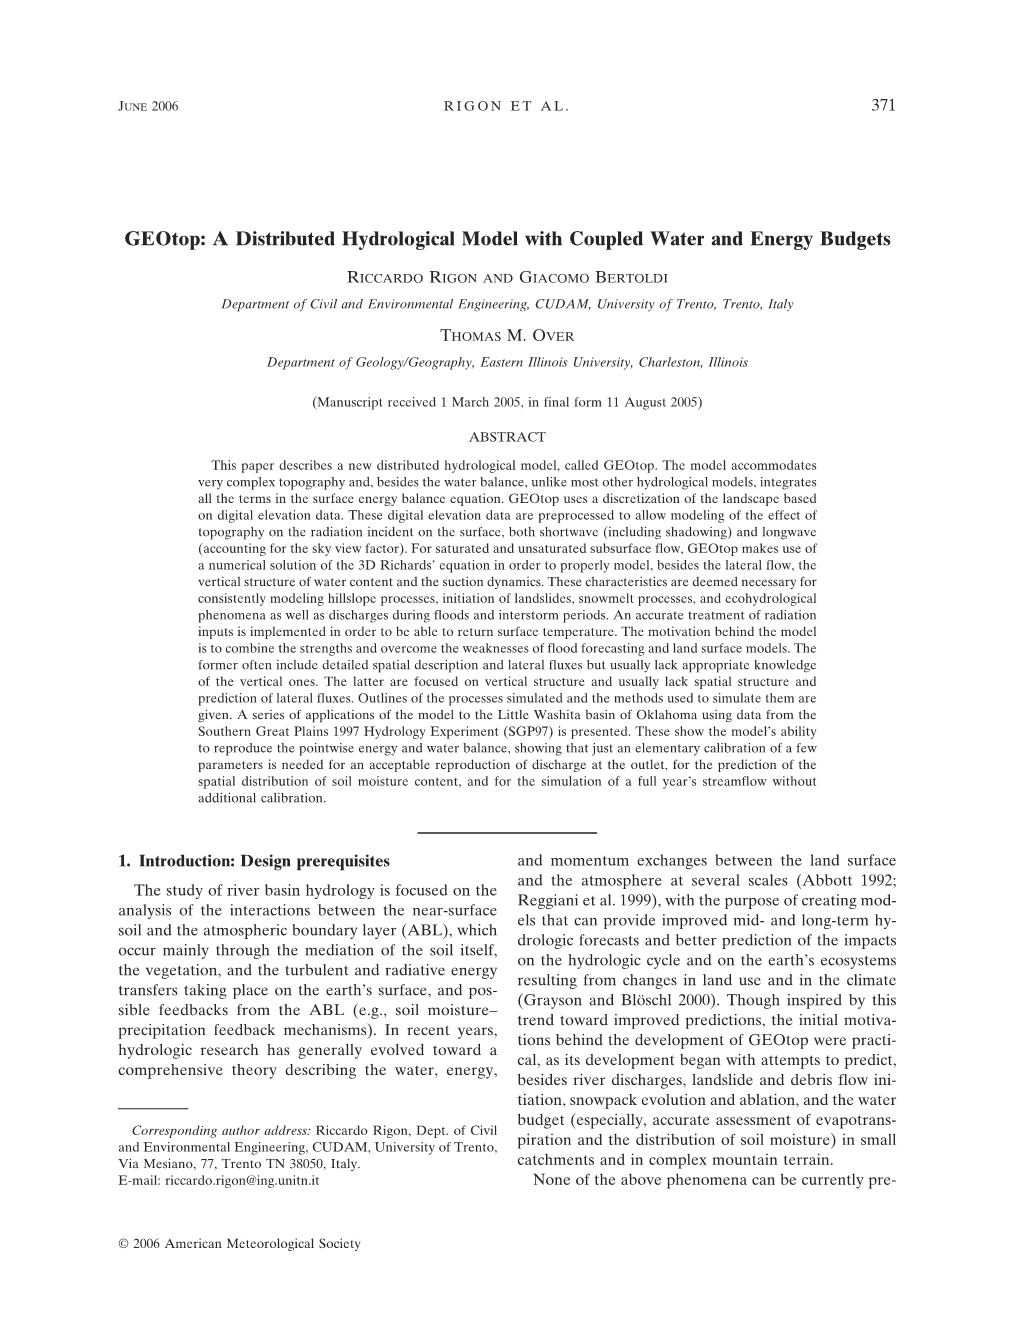 A Distributed Hydrological Model with Coupled Water and Energy Budgets